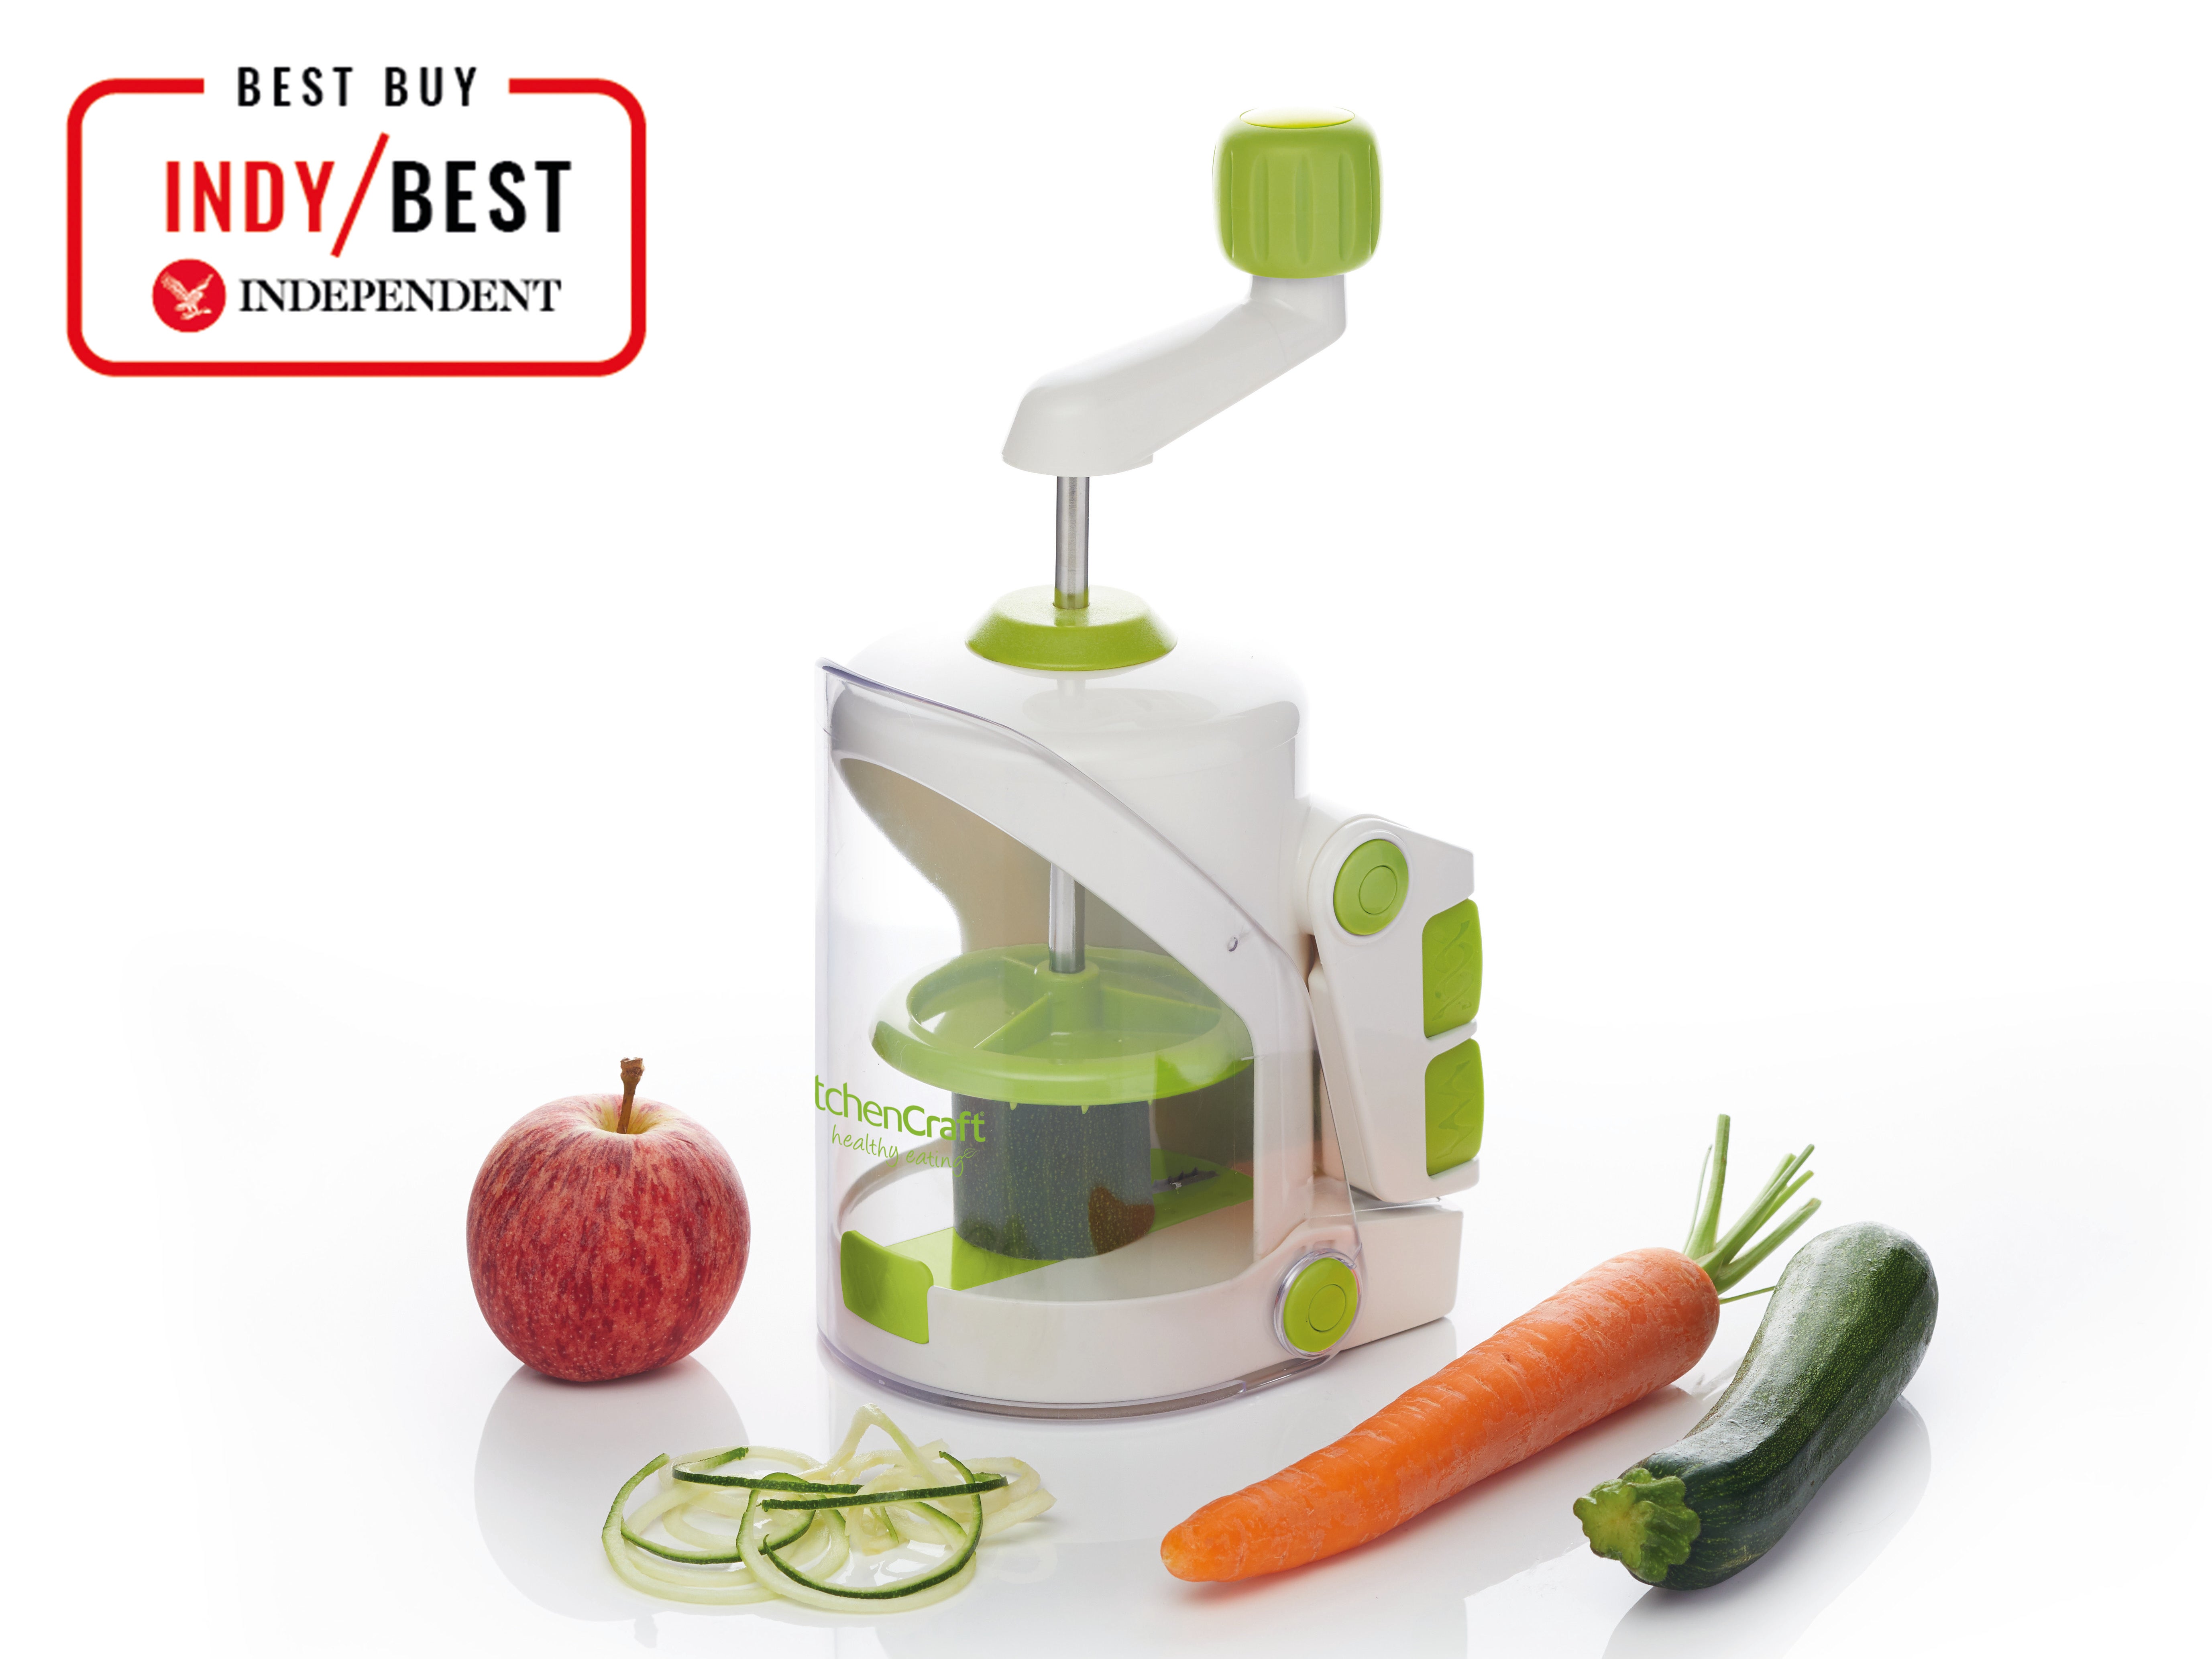 KitchenCraft Healthy Eating 3 Blade Compact Fruit and Vegetable Spiralizer (3) copy.jpg